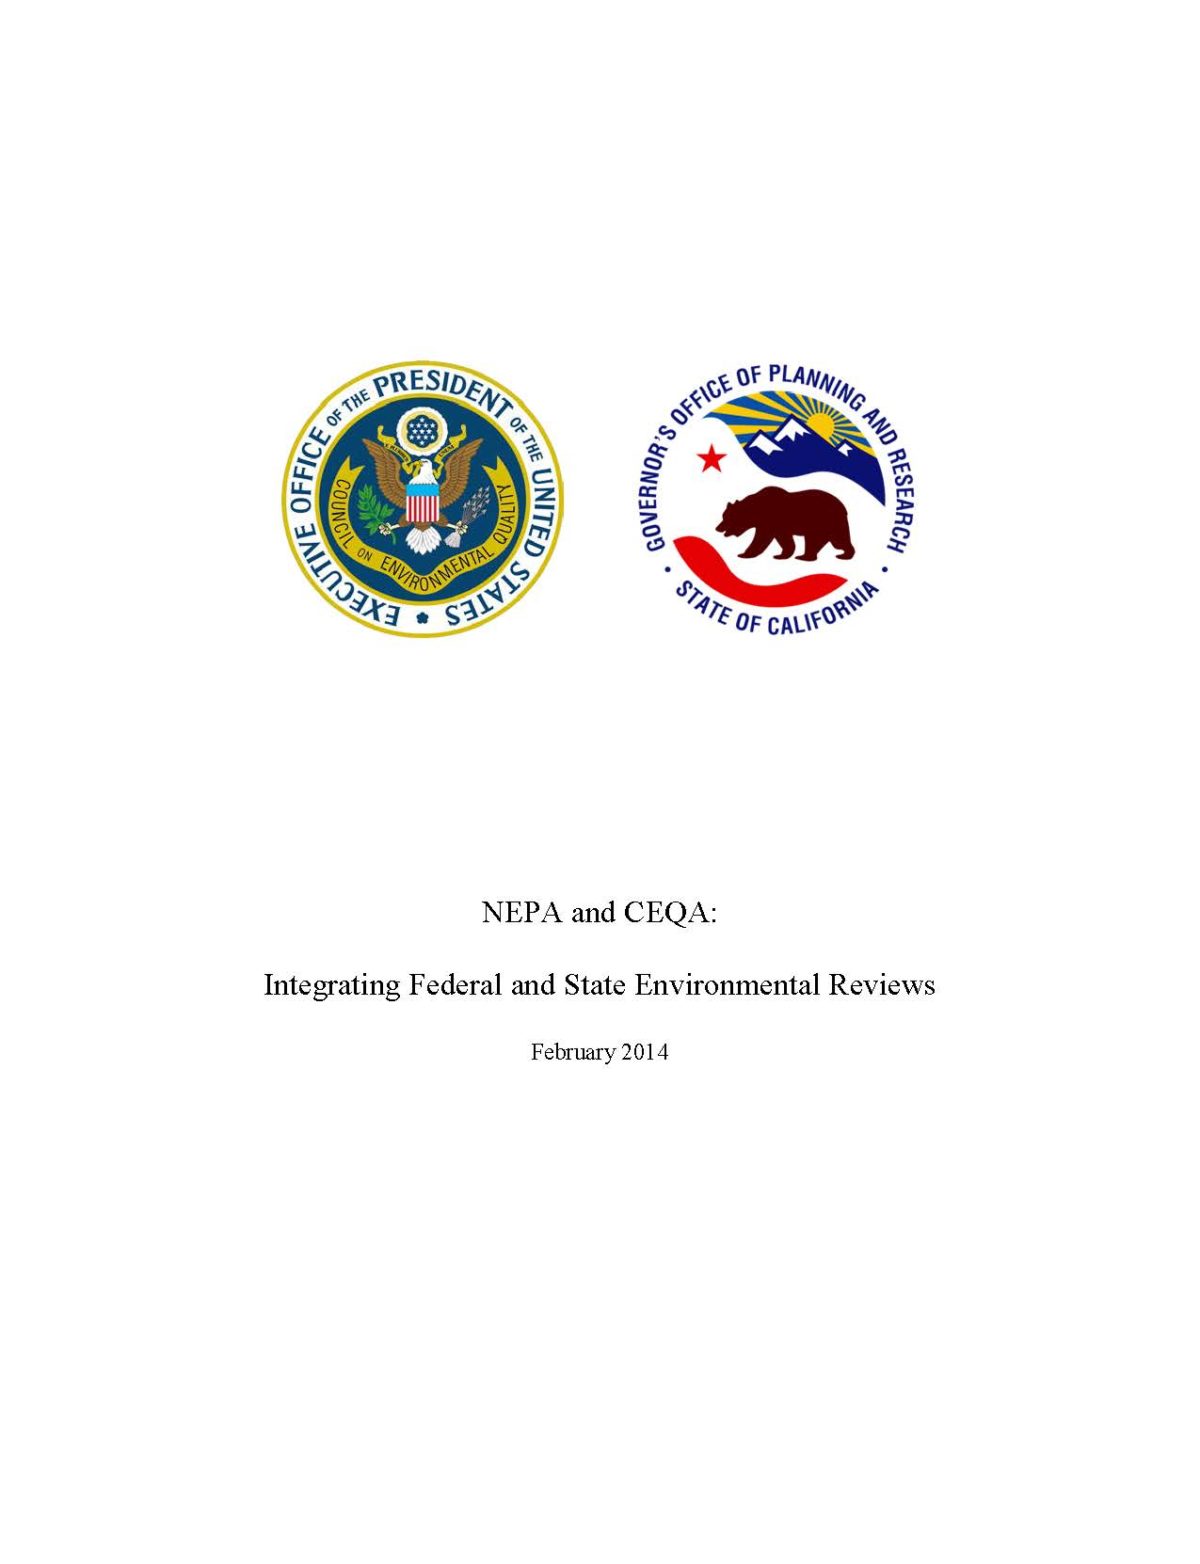 NEPA and CEQA: Integrating Federal and State Environmental Reviews